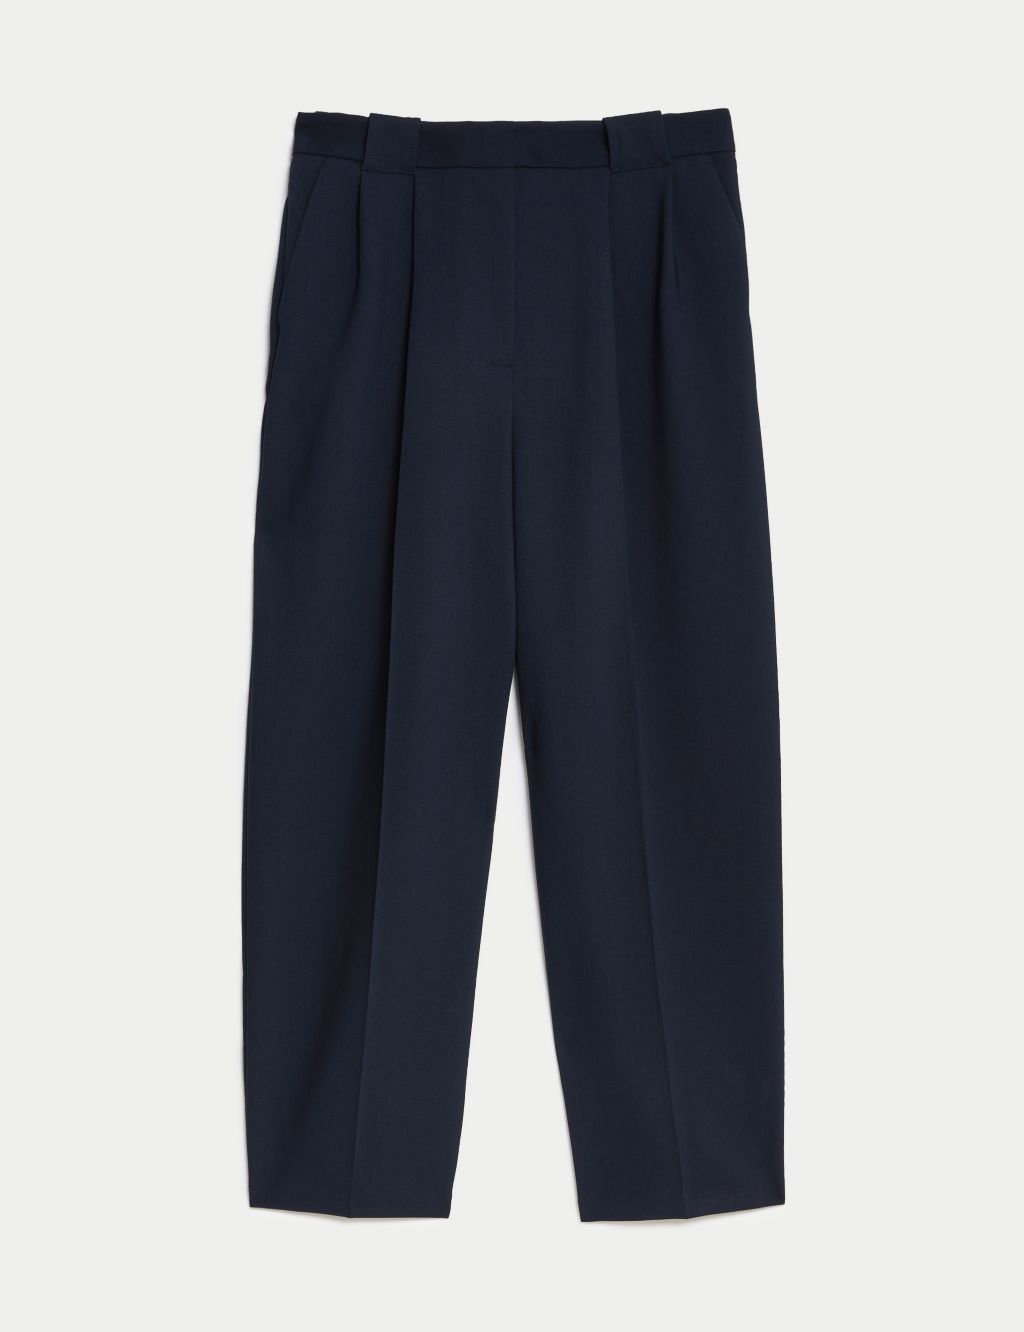 Pleat Front Relaxed Trousers image 2